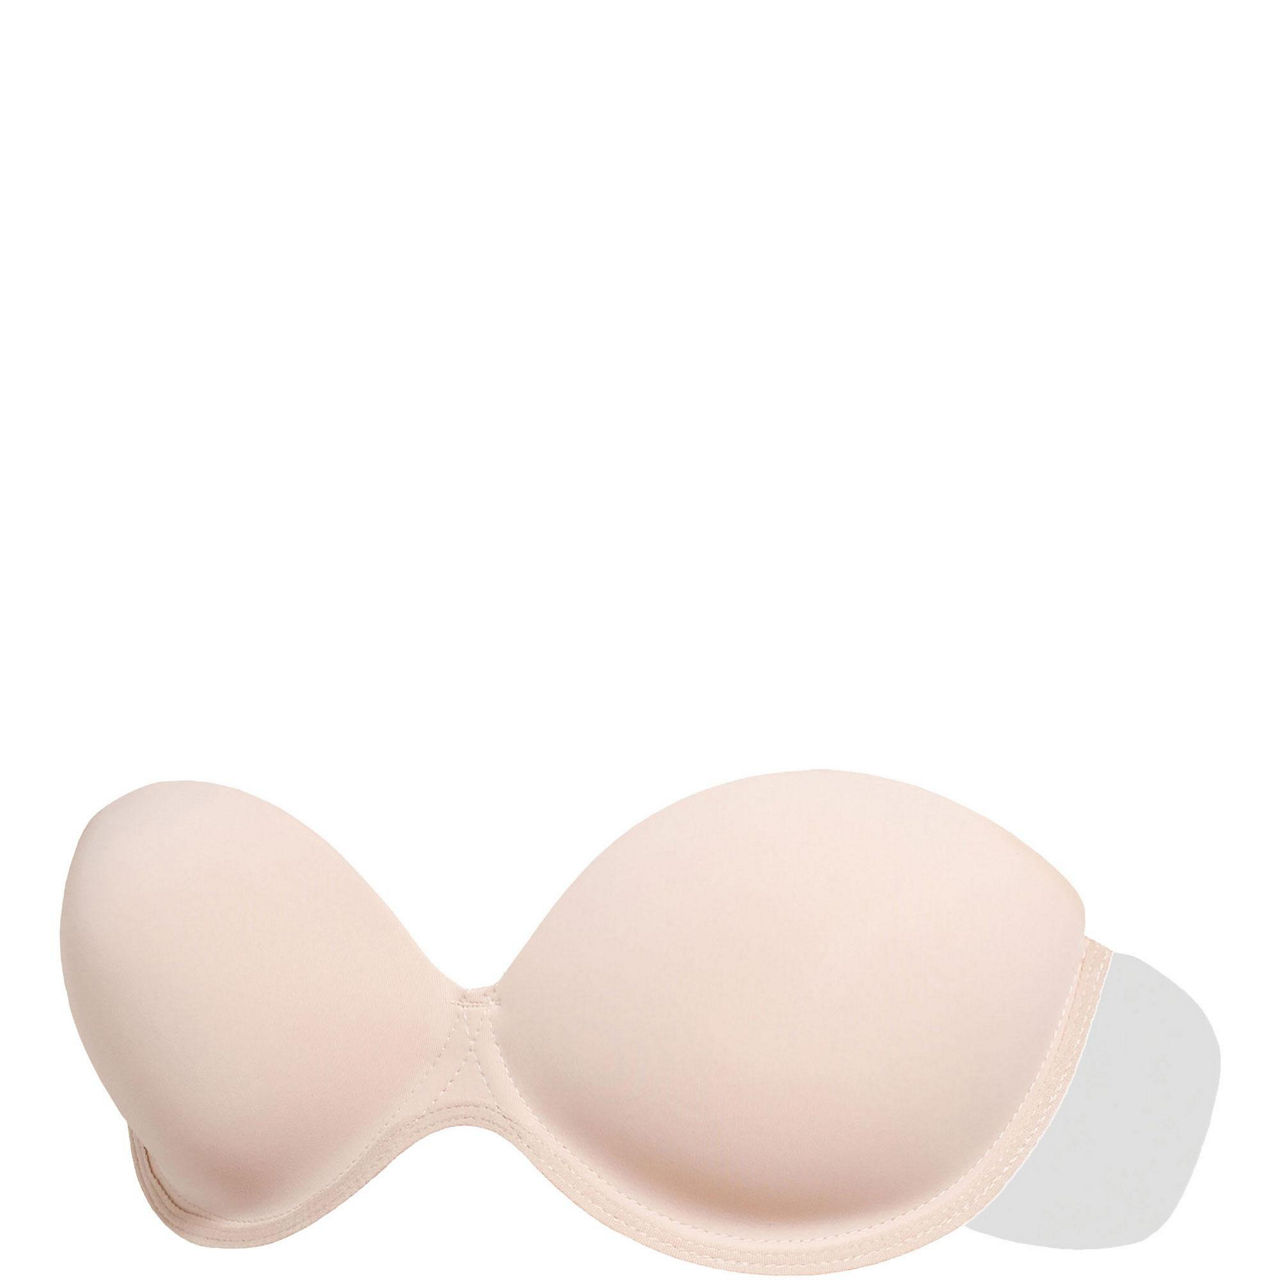 Body Sculpting Backless Strapless Bra by FashionForms – My Bare